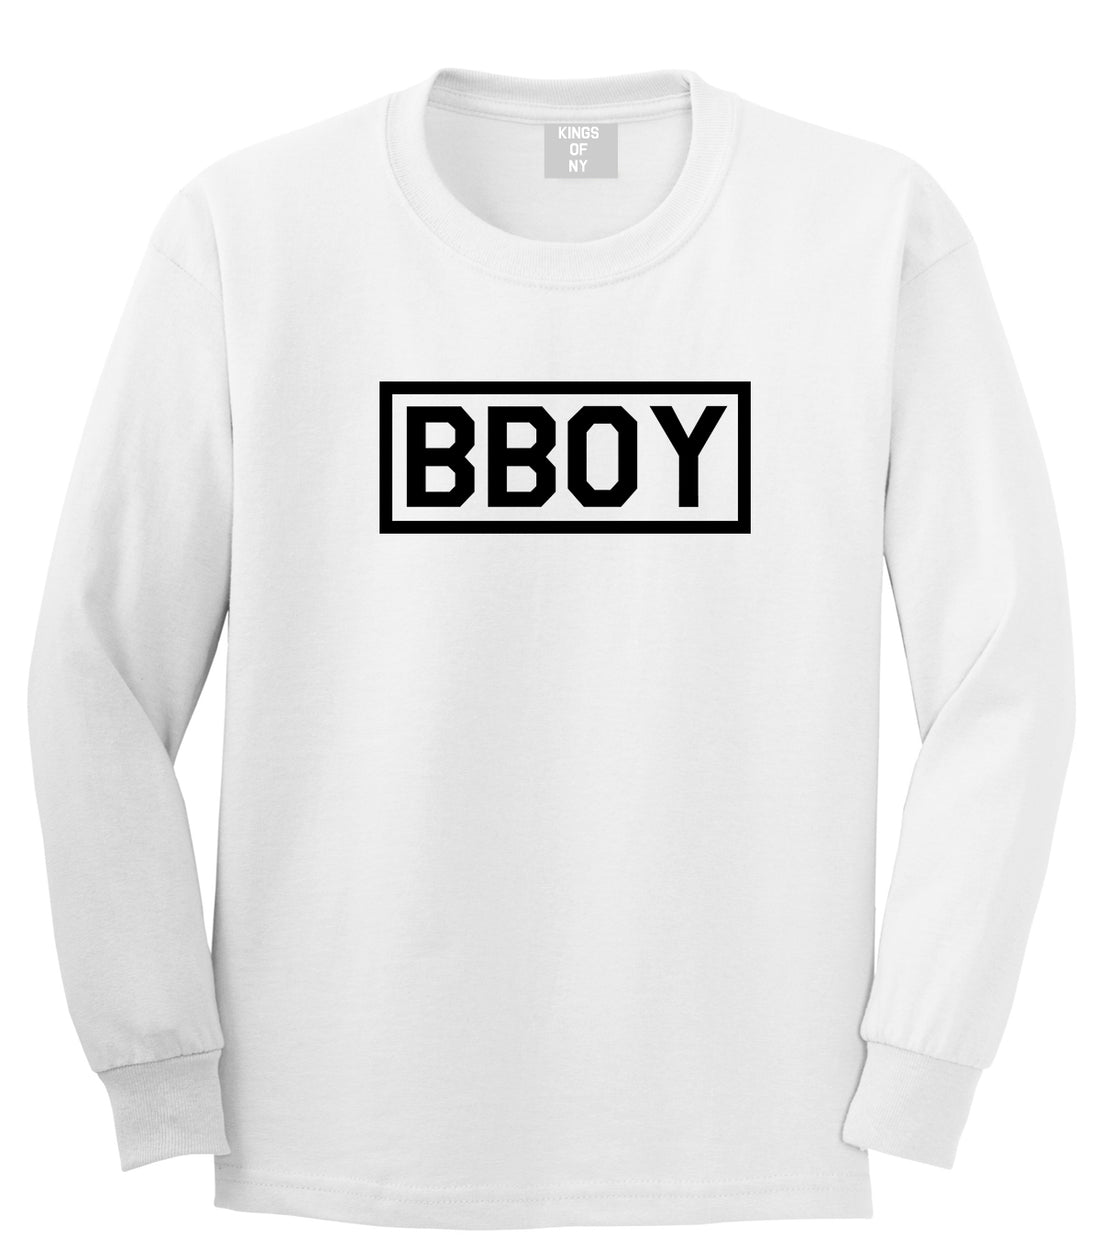 Bboy Breakdancing White Long Sleeve T-Shirt by Kings Of NY